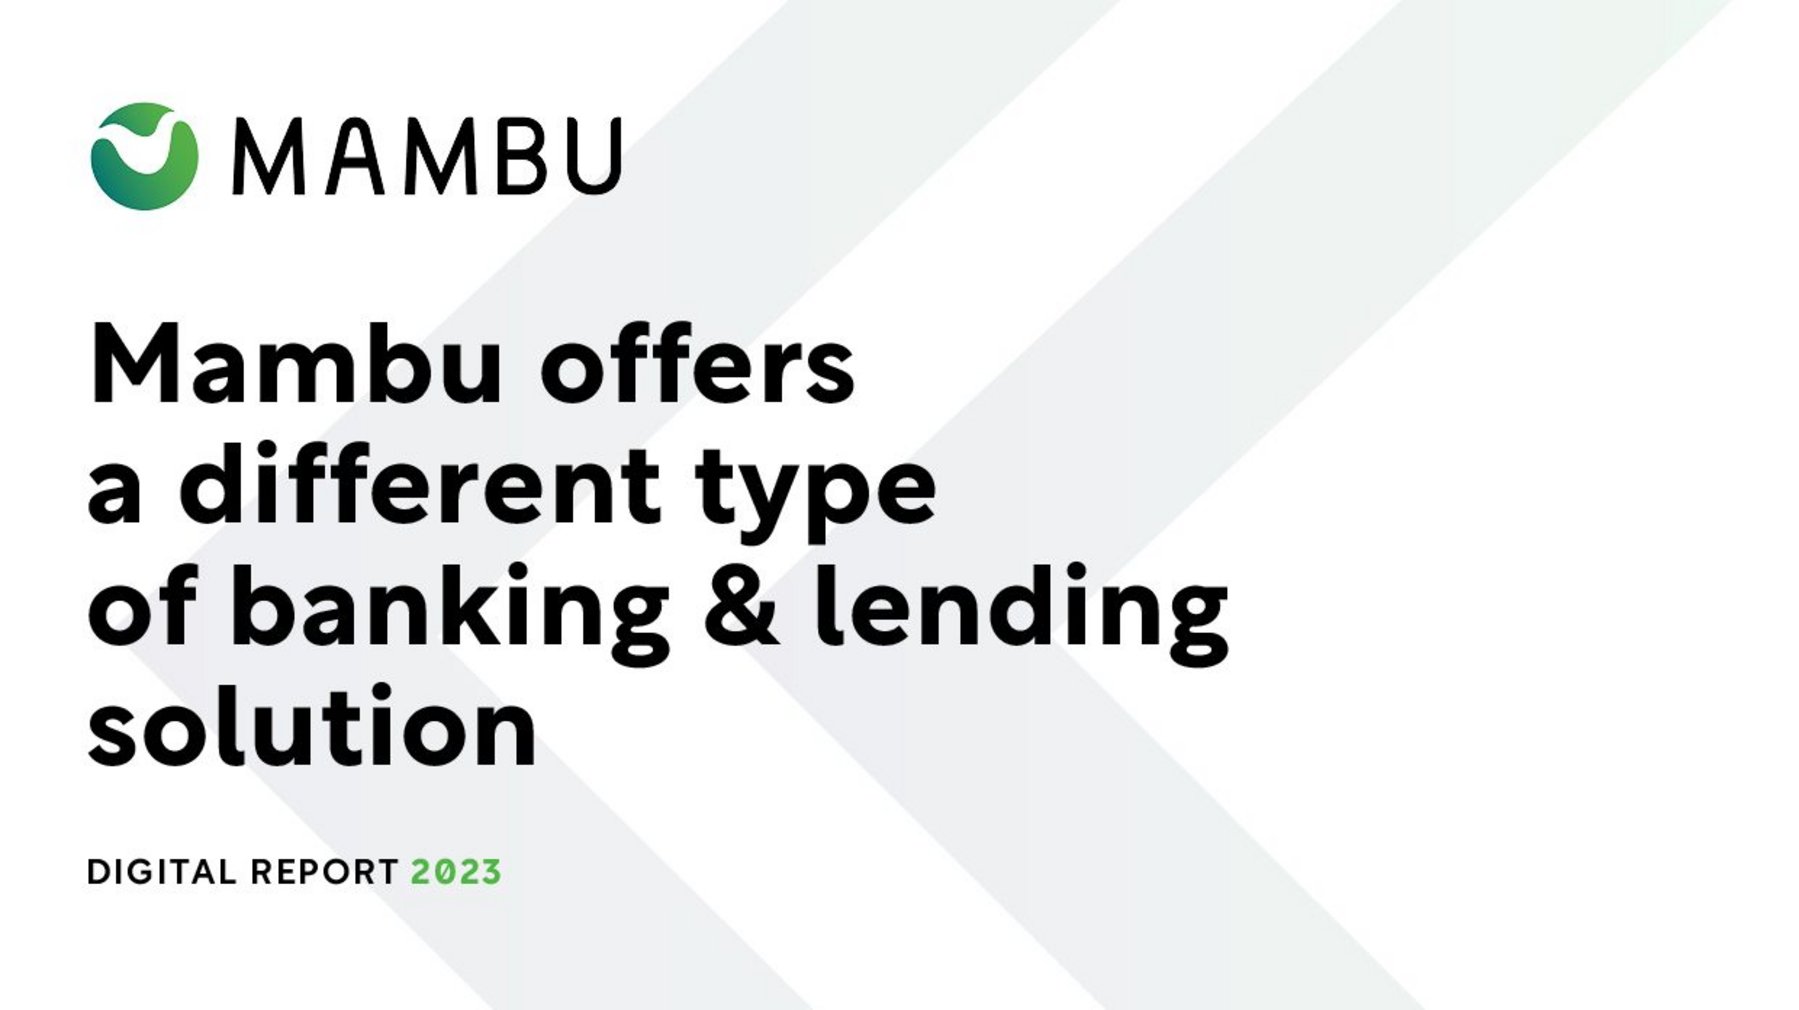 Mambu offers a different type of banking and lending solution